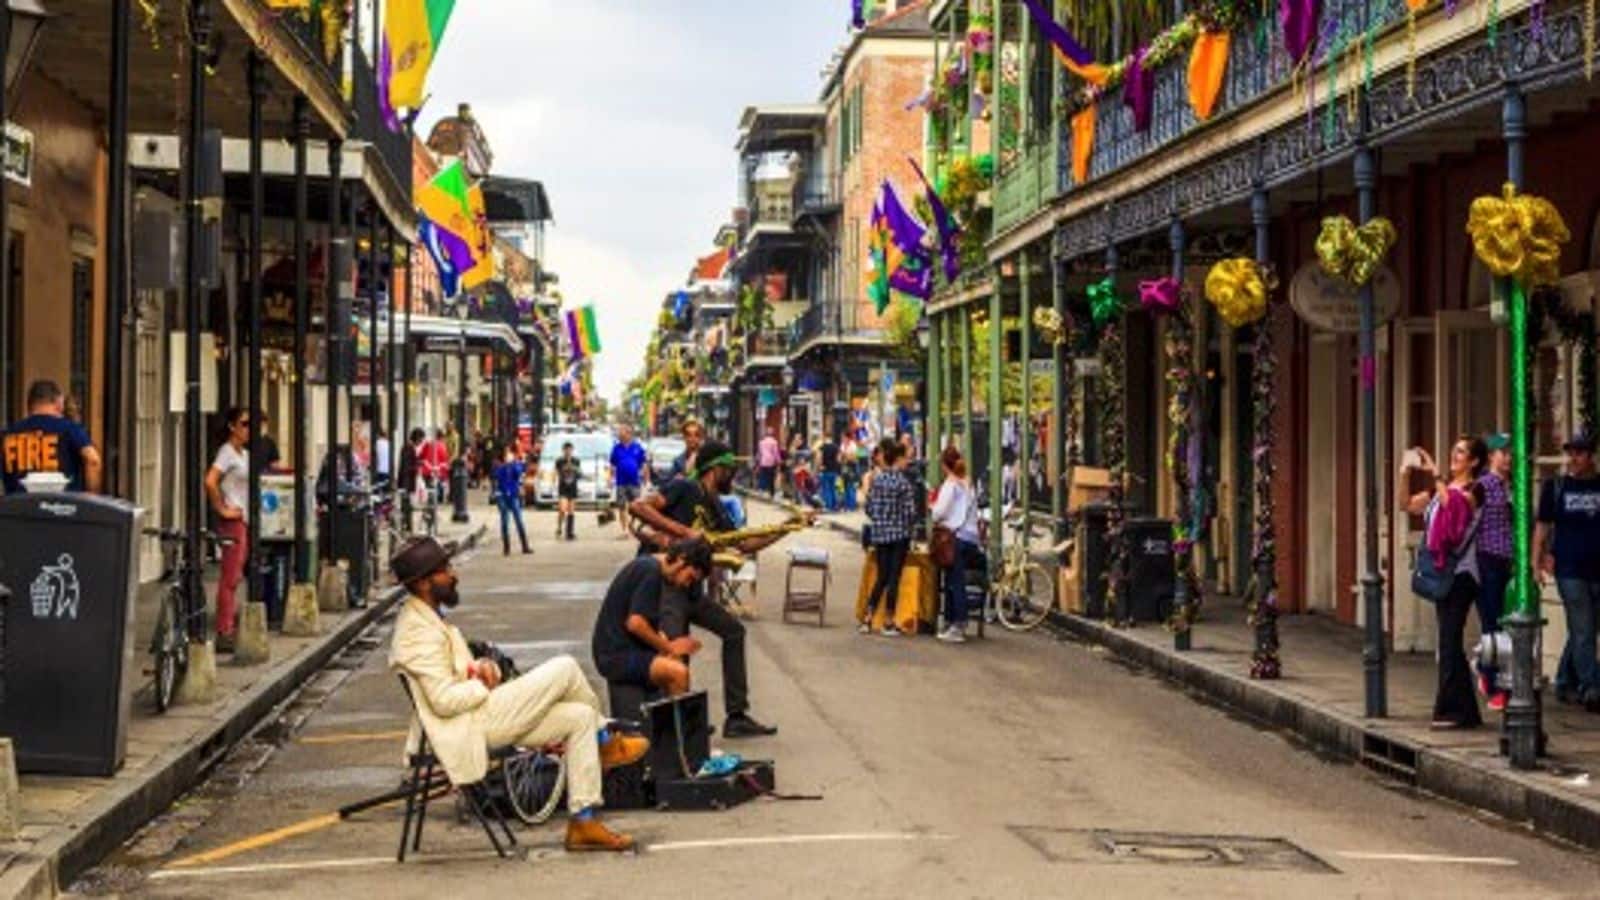 New Orleans is where jazz blends with history